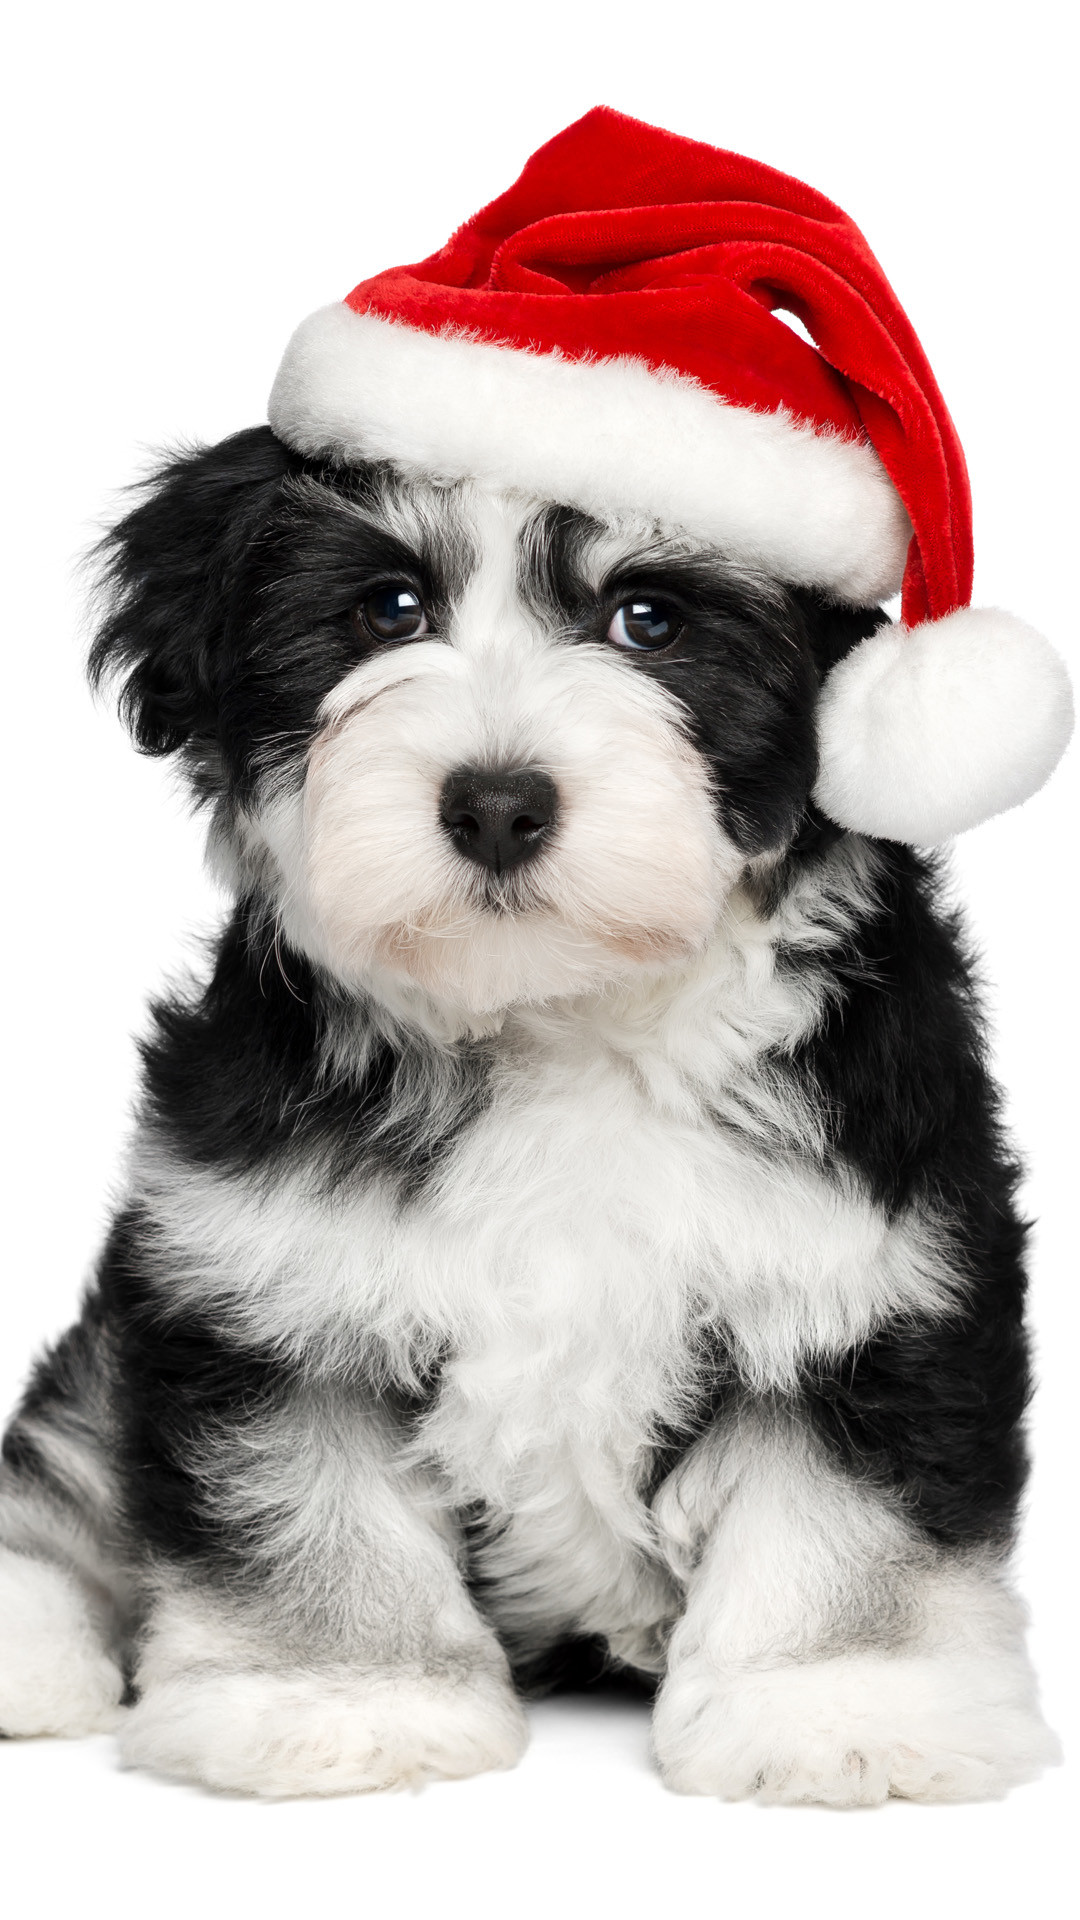 Christmas Puppy Wallpaper Iphone - Cute Dogs Wallpaper Christmas - HD Wallpaper 